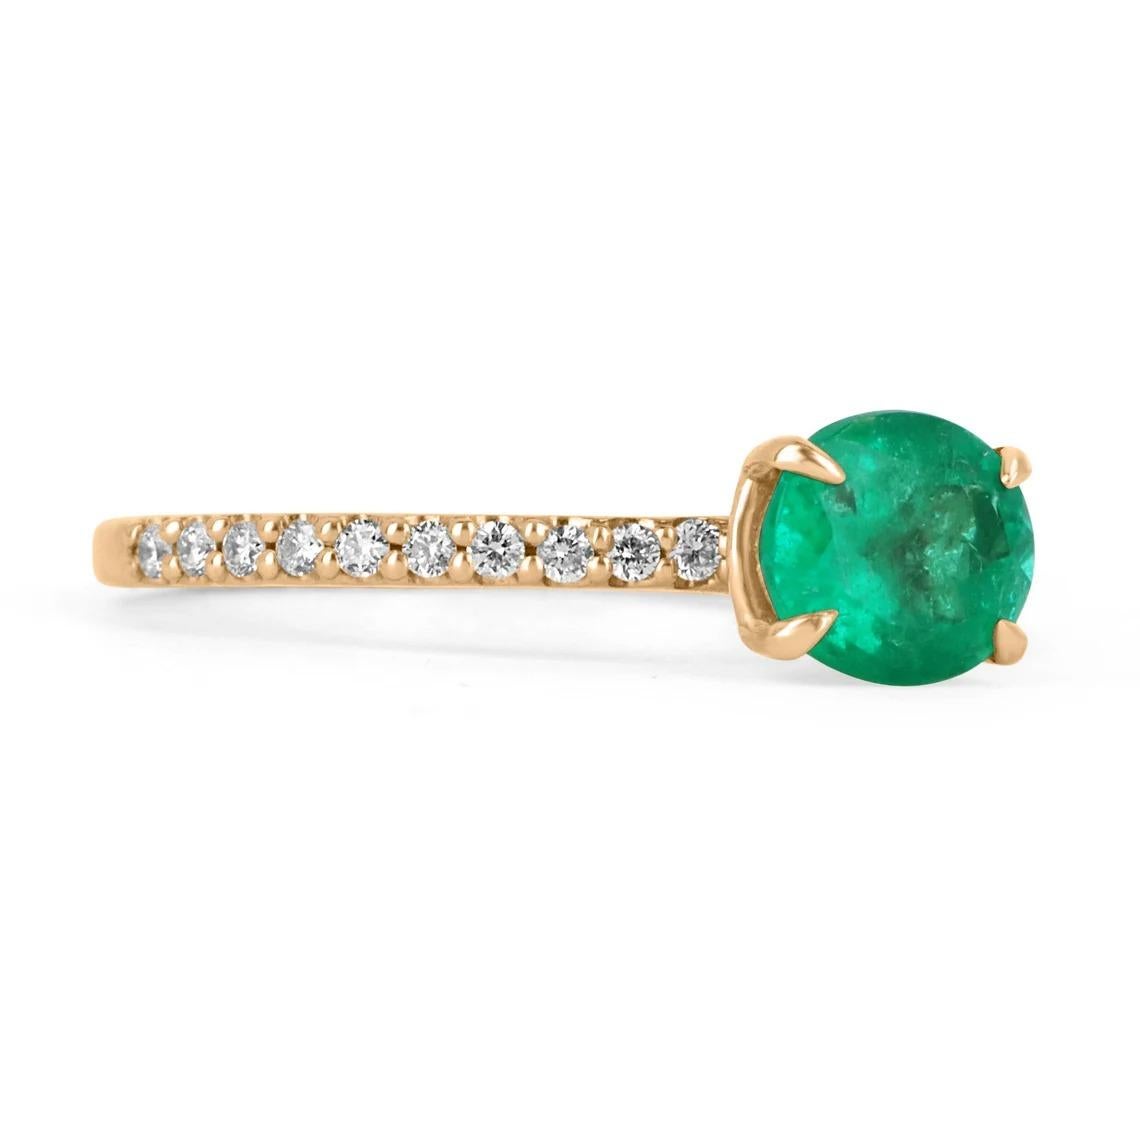 Elegantly displayed is a natural, oval cut Colombian emerald and diamond accent engagement ring. The center gem is a fine quality, oval cut, emerald filled with life and brilliance! Among the emeralds impressive qualities are its vibrant color and